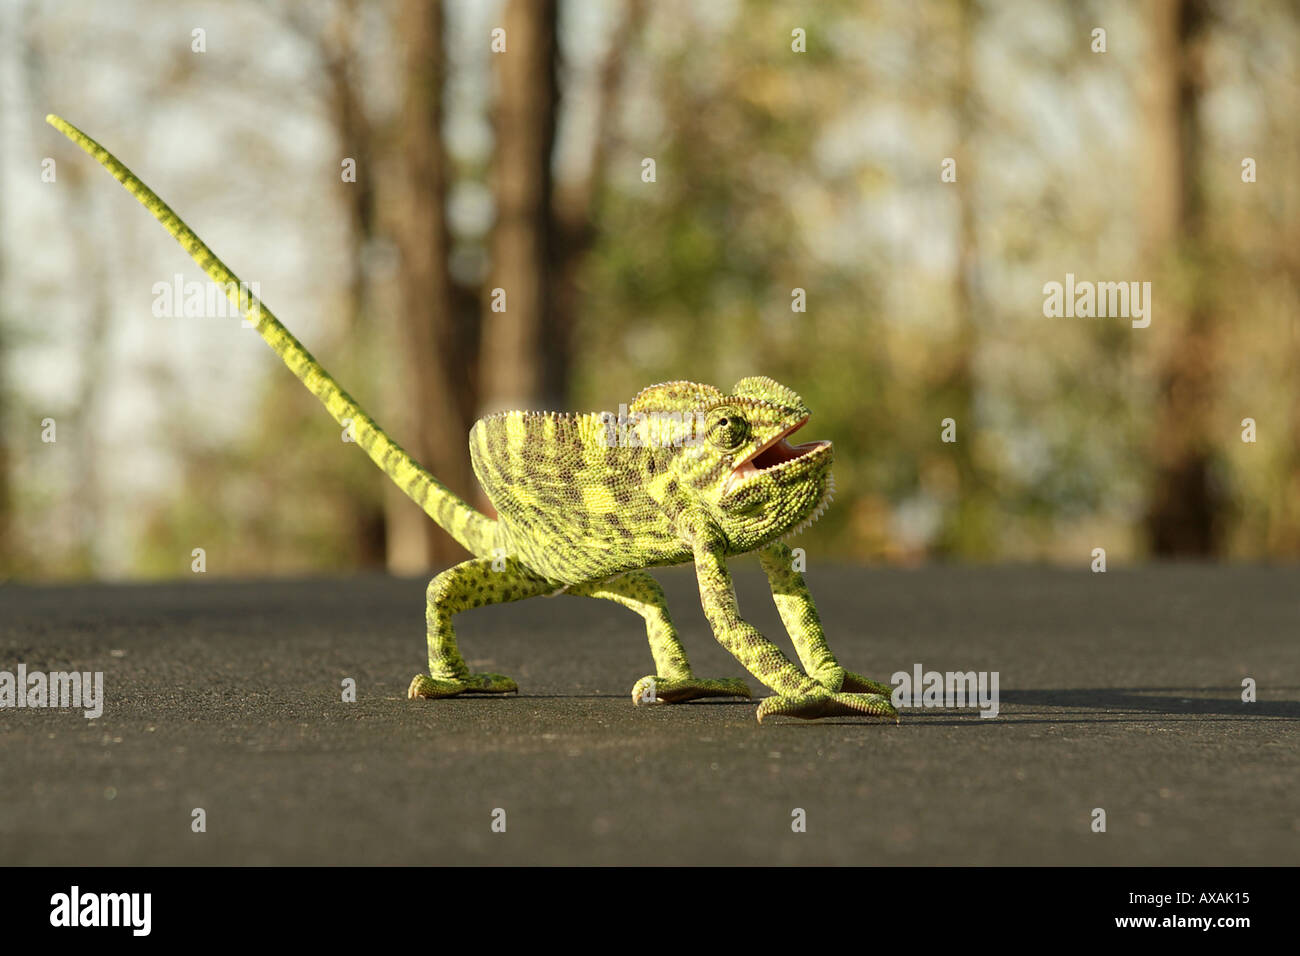 Chameleon lizard of Africa and Madagascar Stock Photo